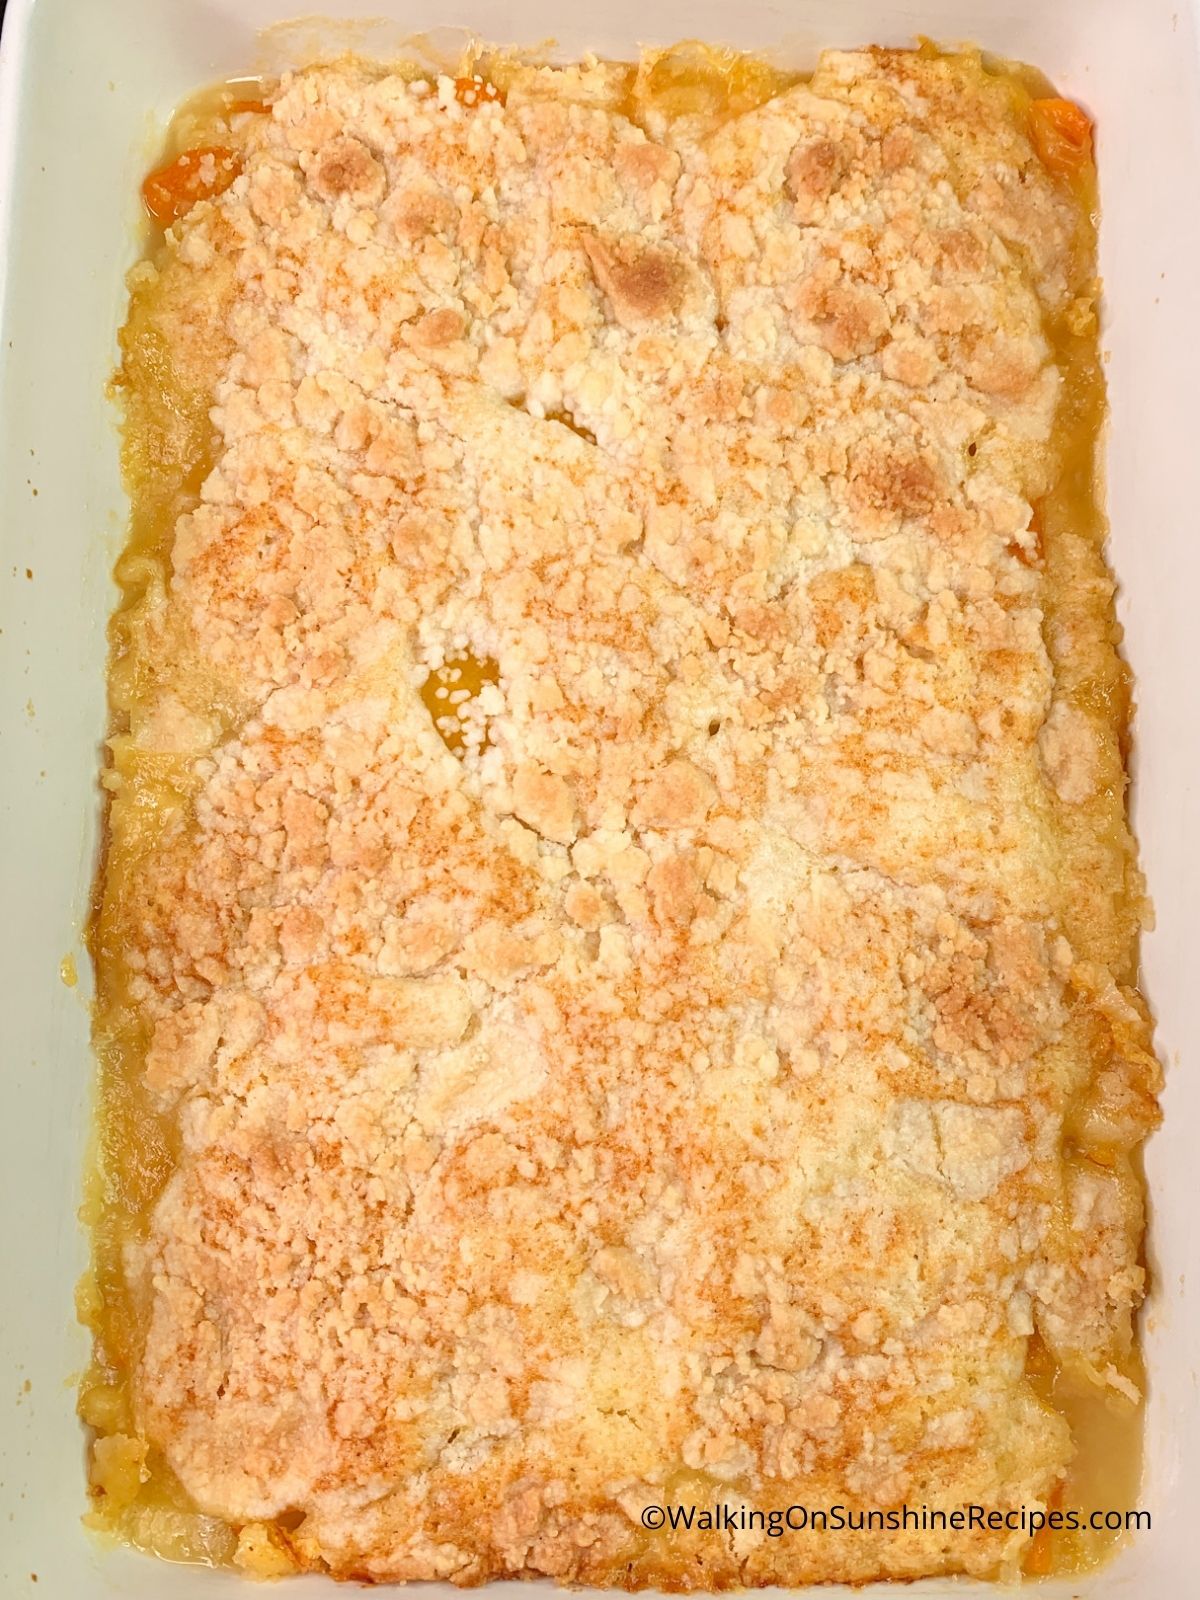 peach cobbler made with white cake mix baked.